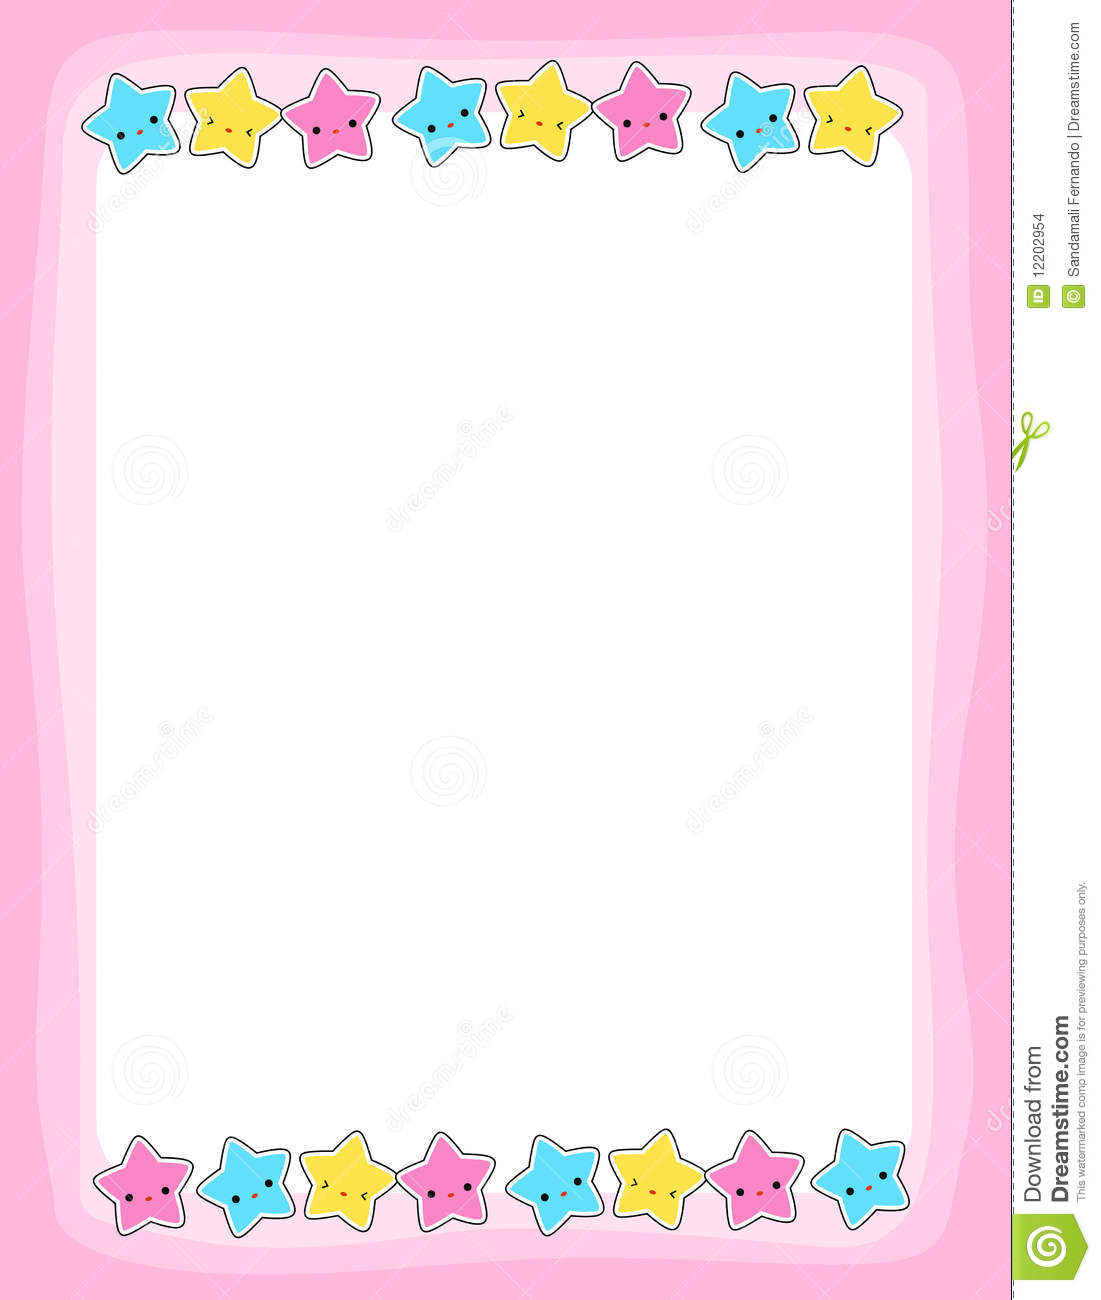 Cute Colorful Stars Border   Frame For Greeting Cards Party    